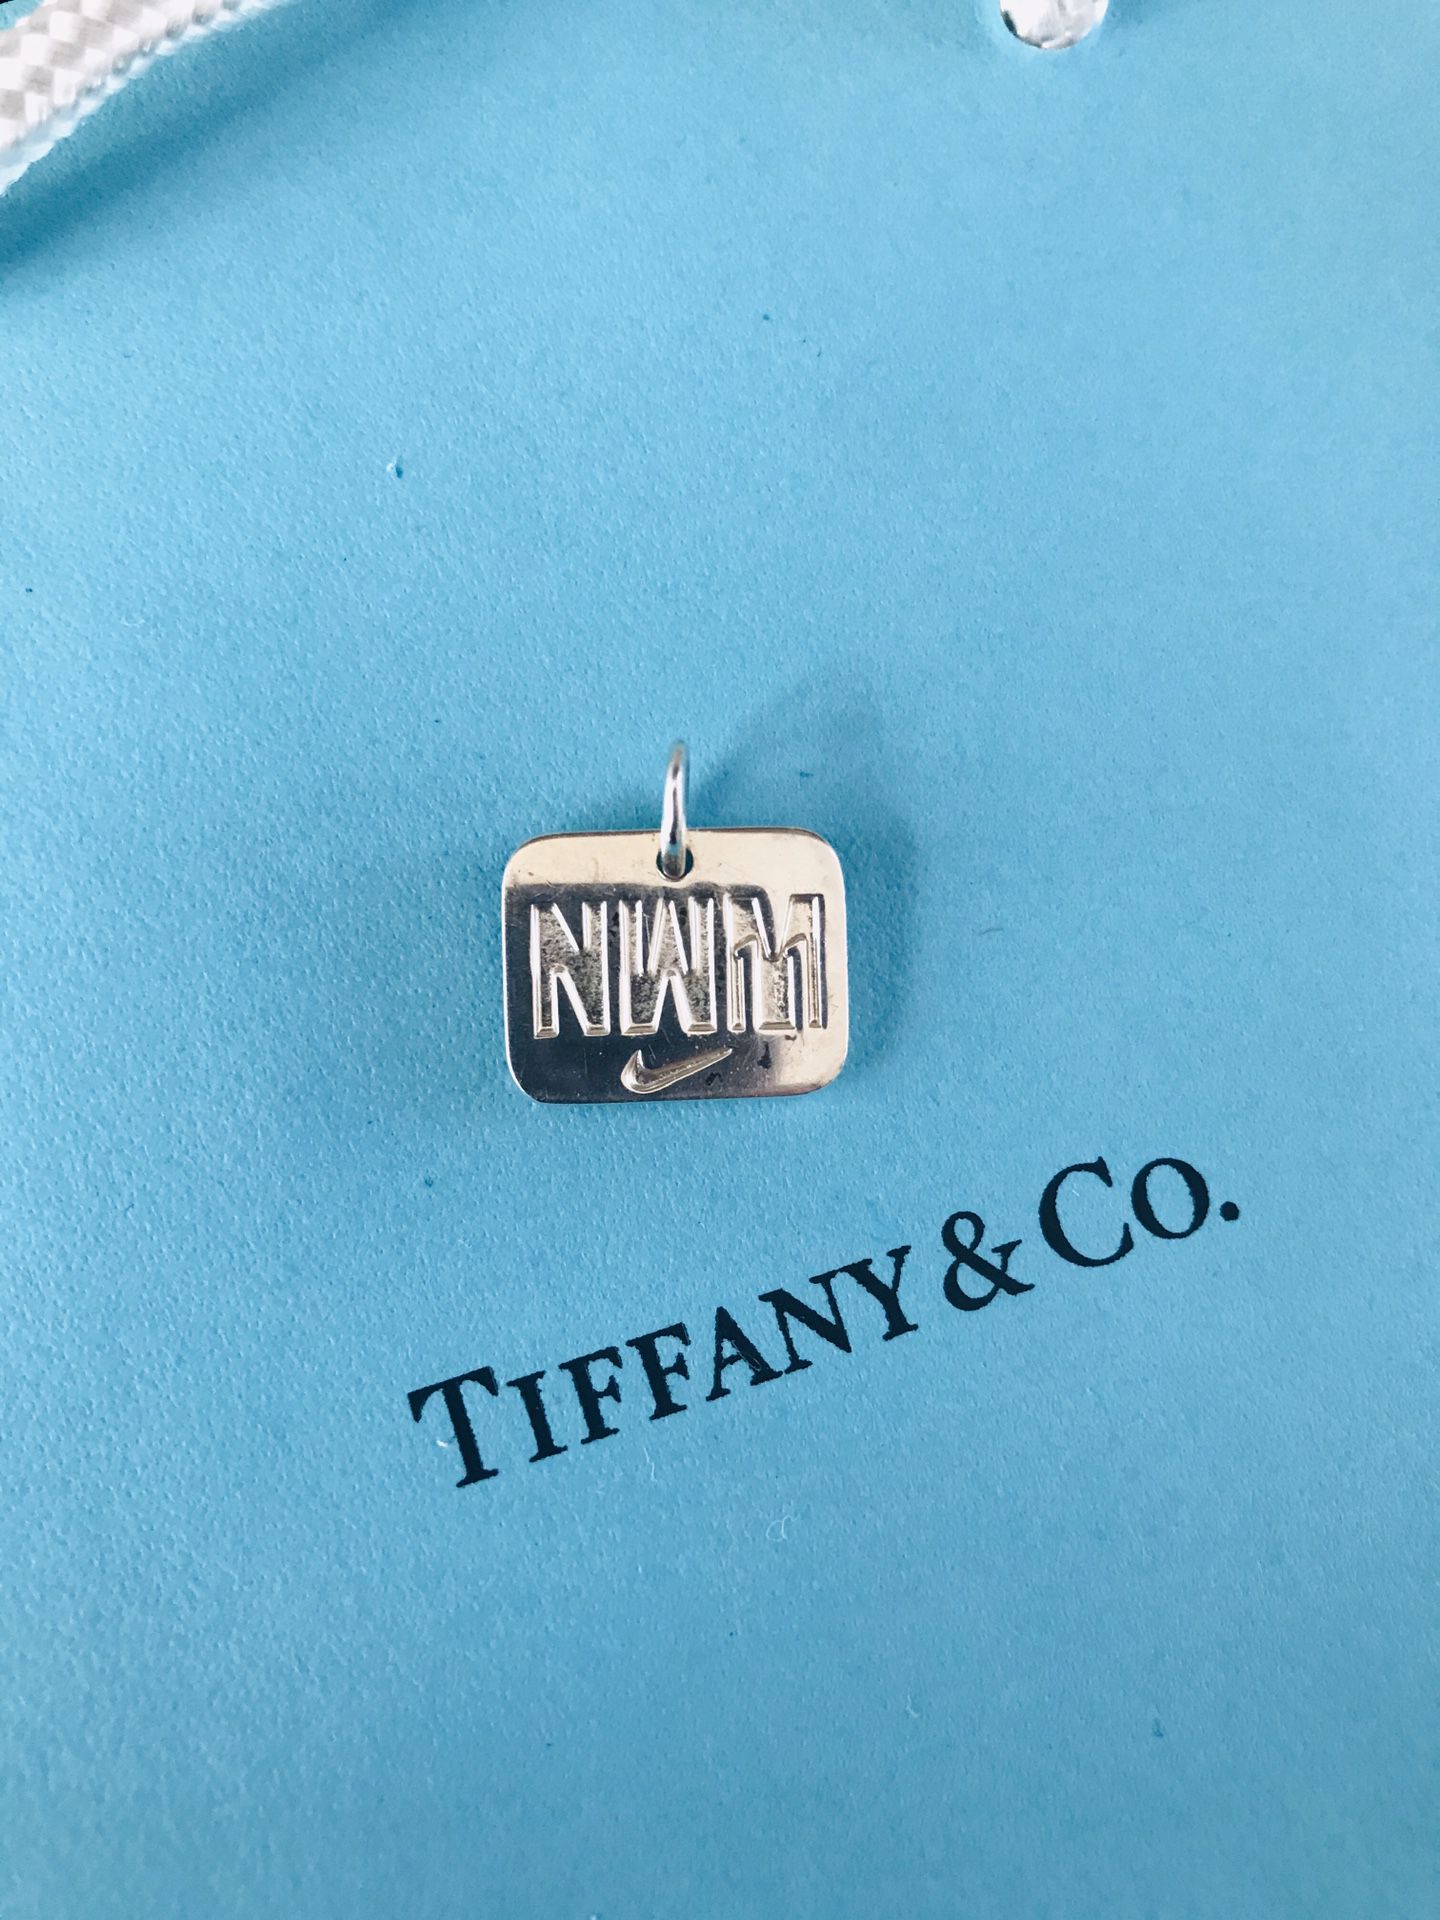 Tiffany & Co. Pre-owned Nike pendant stamped authentic please ask questions thank you for looking Make me an offer